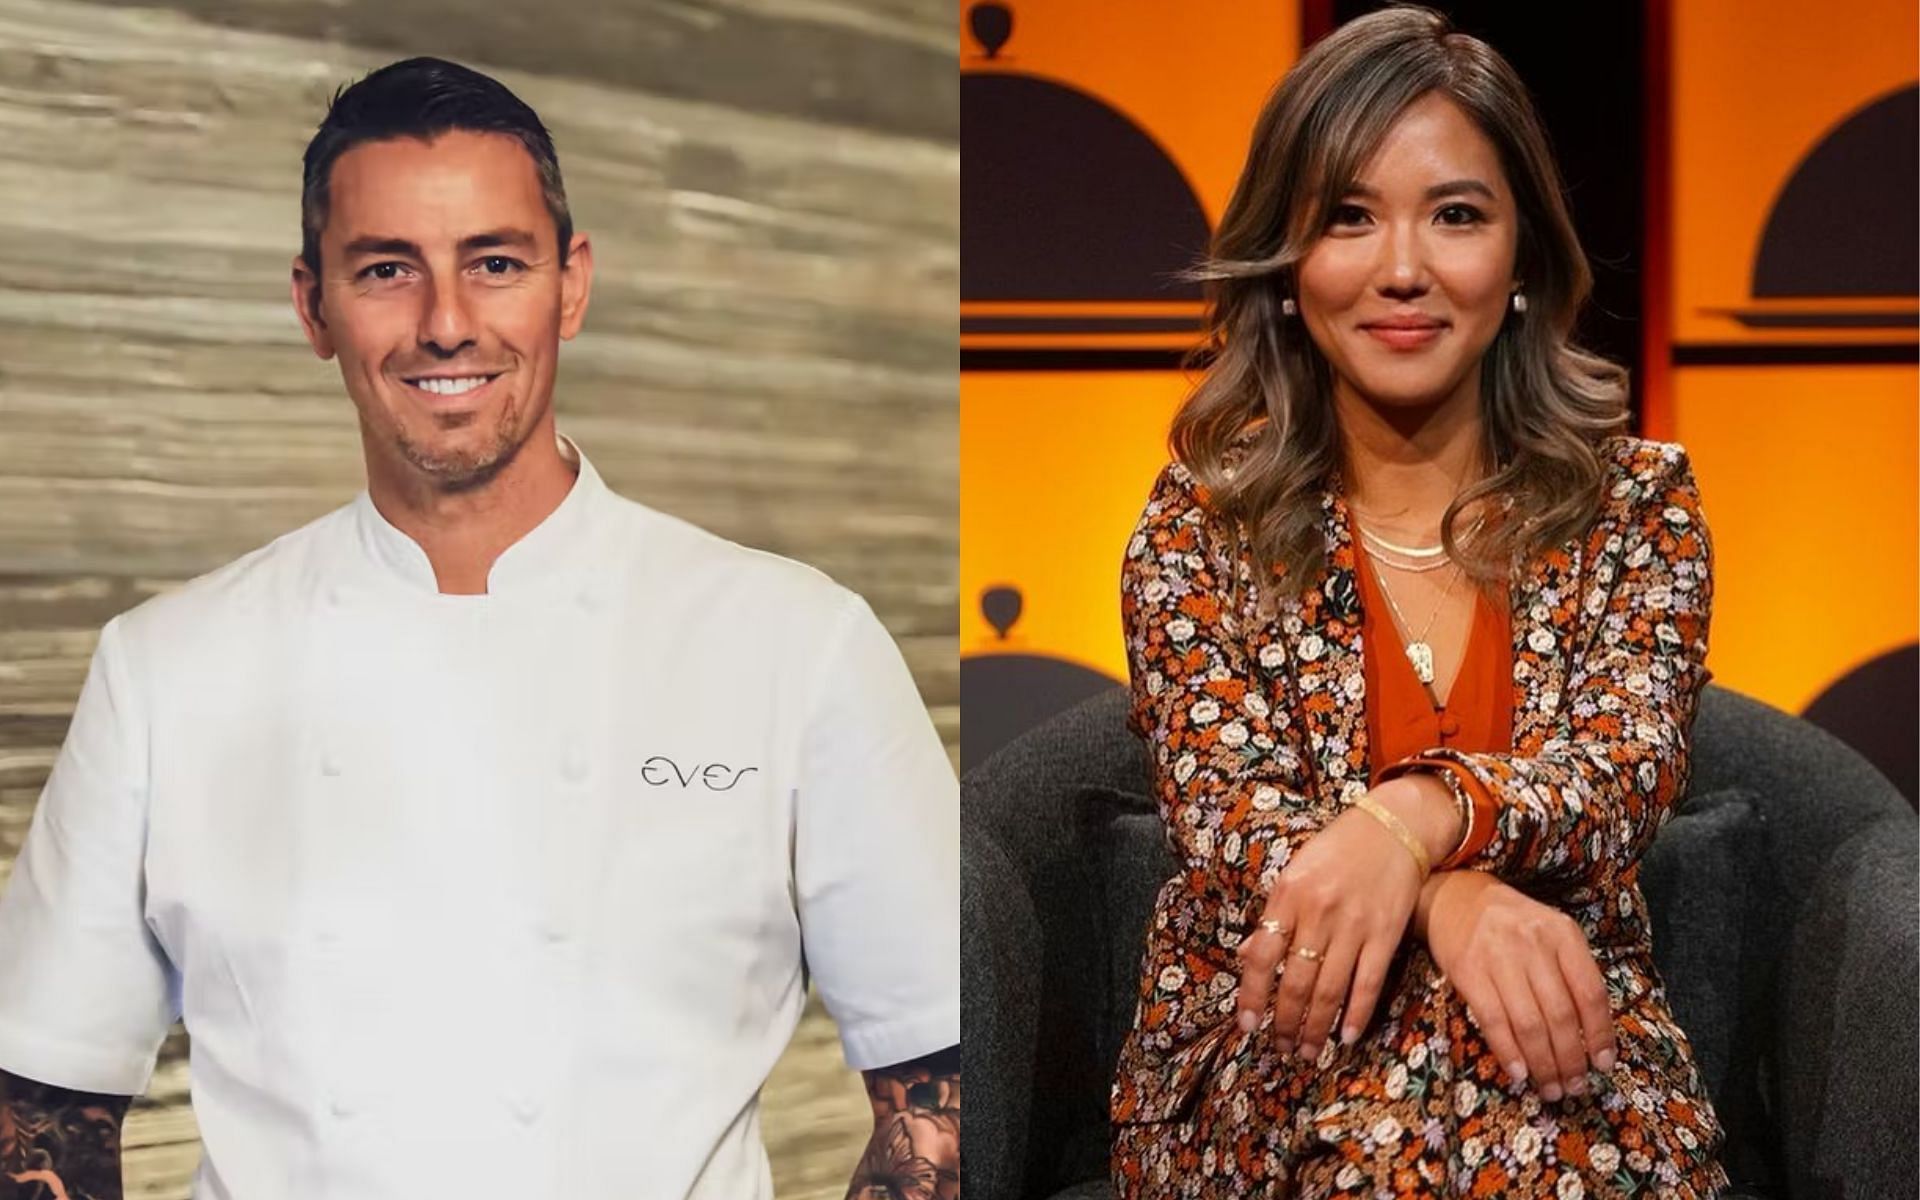 urtis Duffy and Esther Choi will appear as Challenger Chefs on Iron Chef: Quest for an Iron Legend (Images via ever-restaurant and choibites/ Instagram)